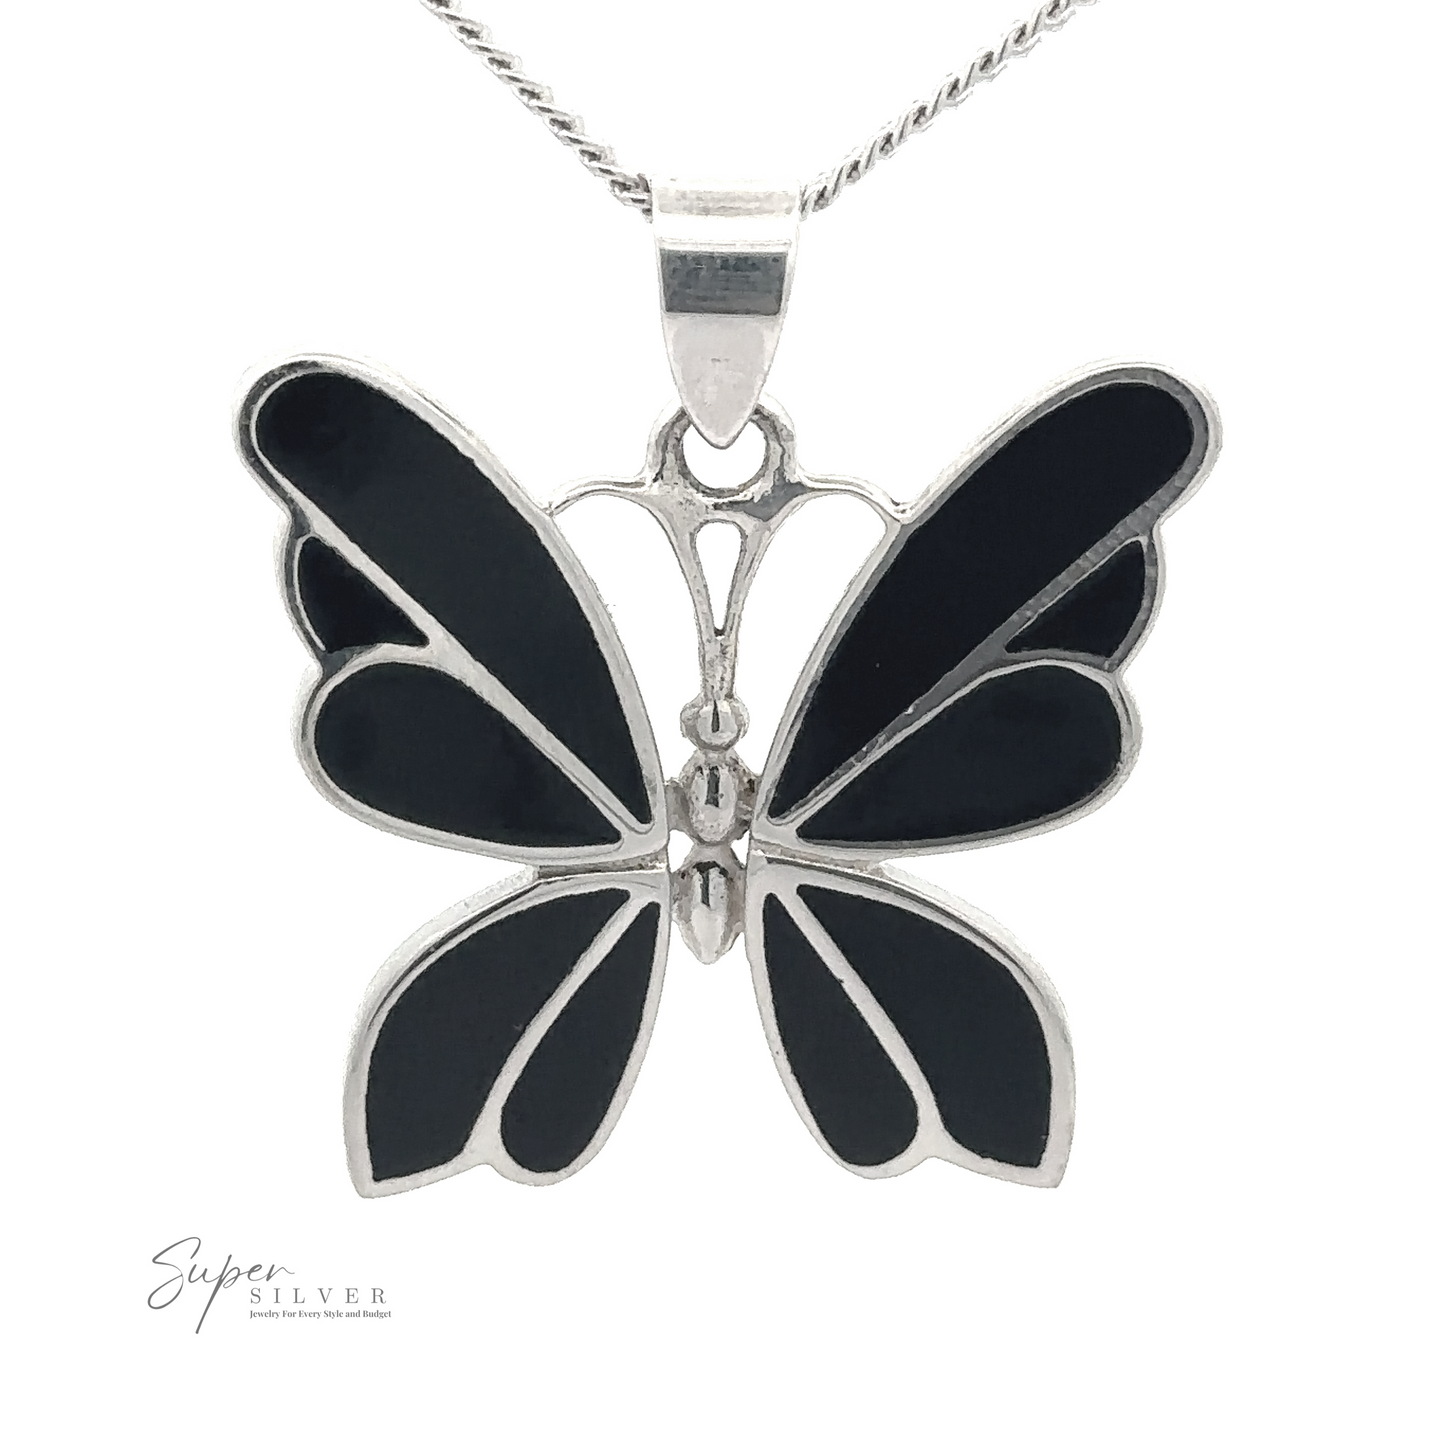 
                  
                    Image of a Medium Inlay Butterfly Pendant with black inlay details, hanging from a silver chain. The logo "Super Silver" is visible in the corner.
                  
                